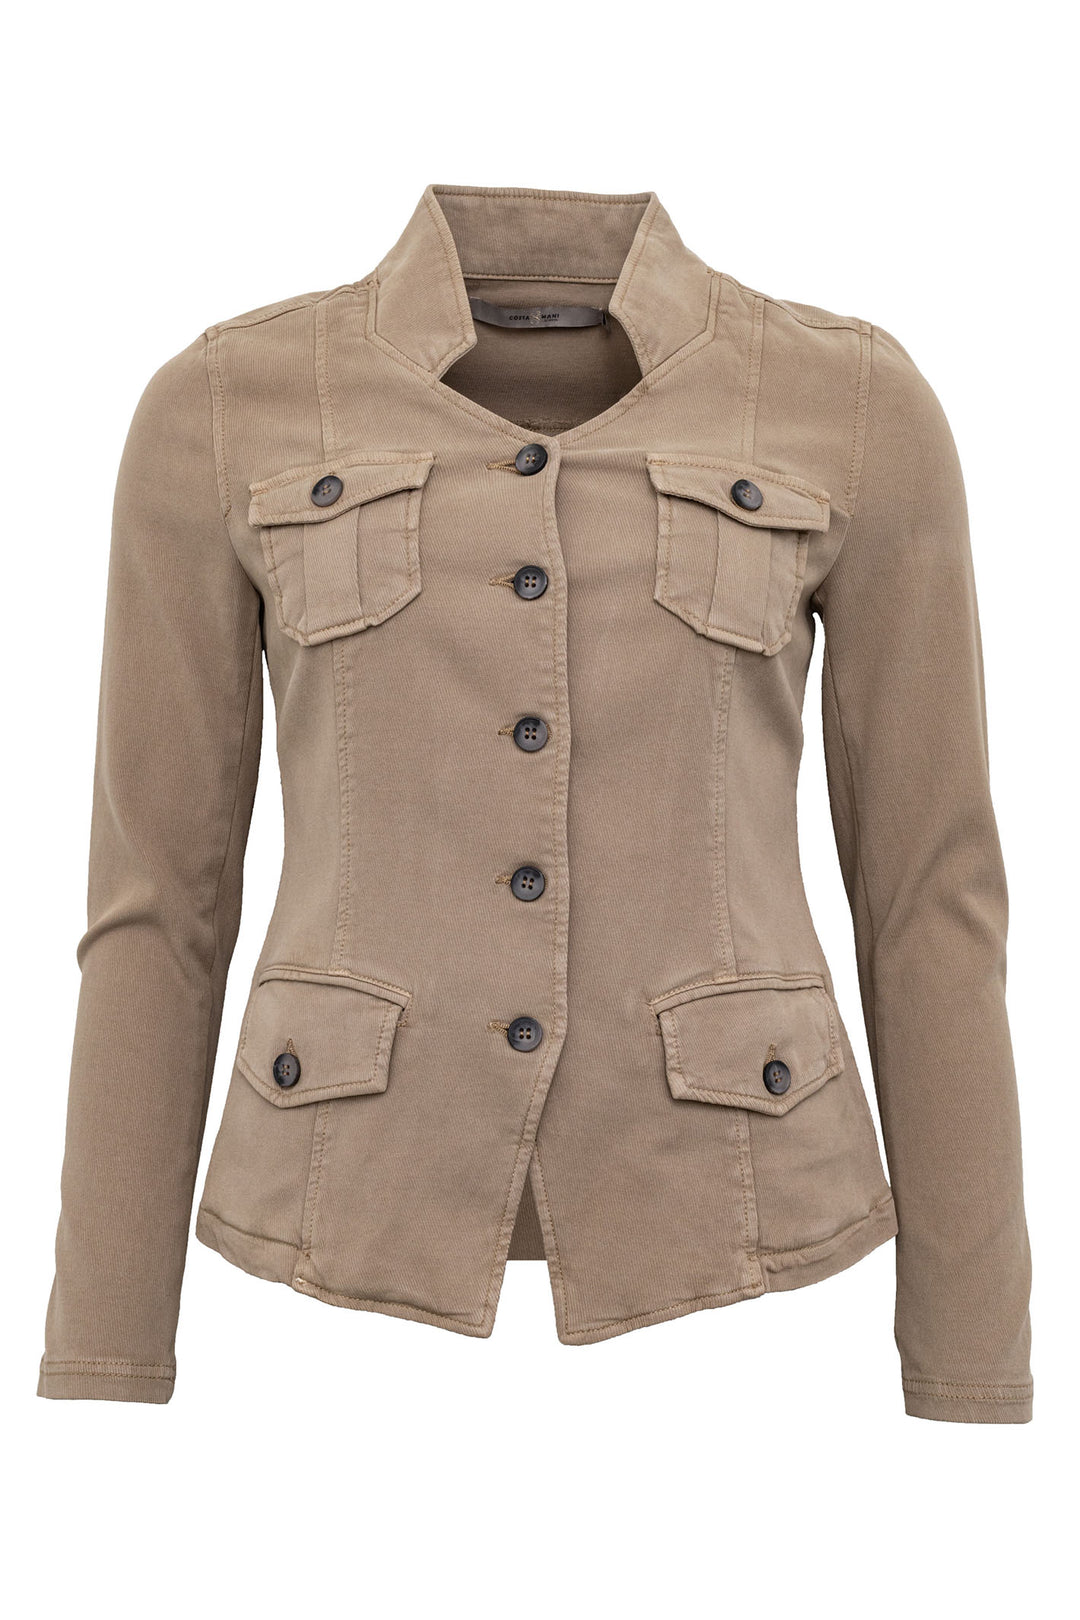 Costa Mani 2401908 Coss Wolf Taupe Stretch Jersey Jacket - Expereince Boutique